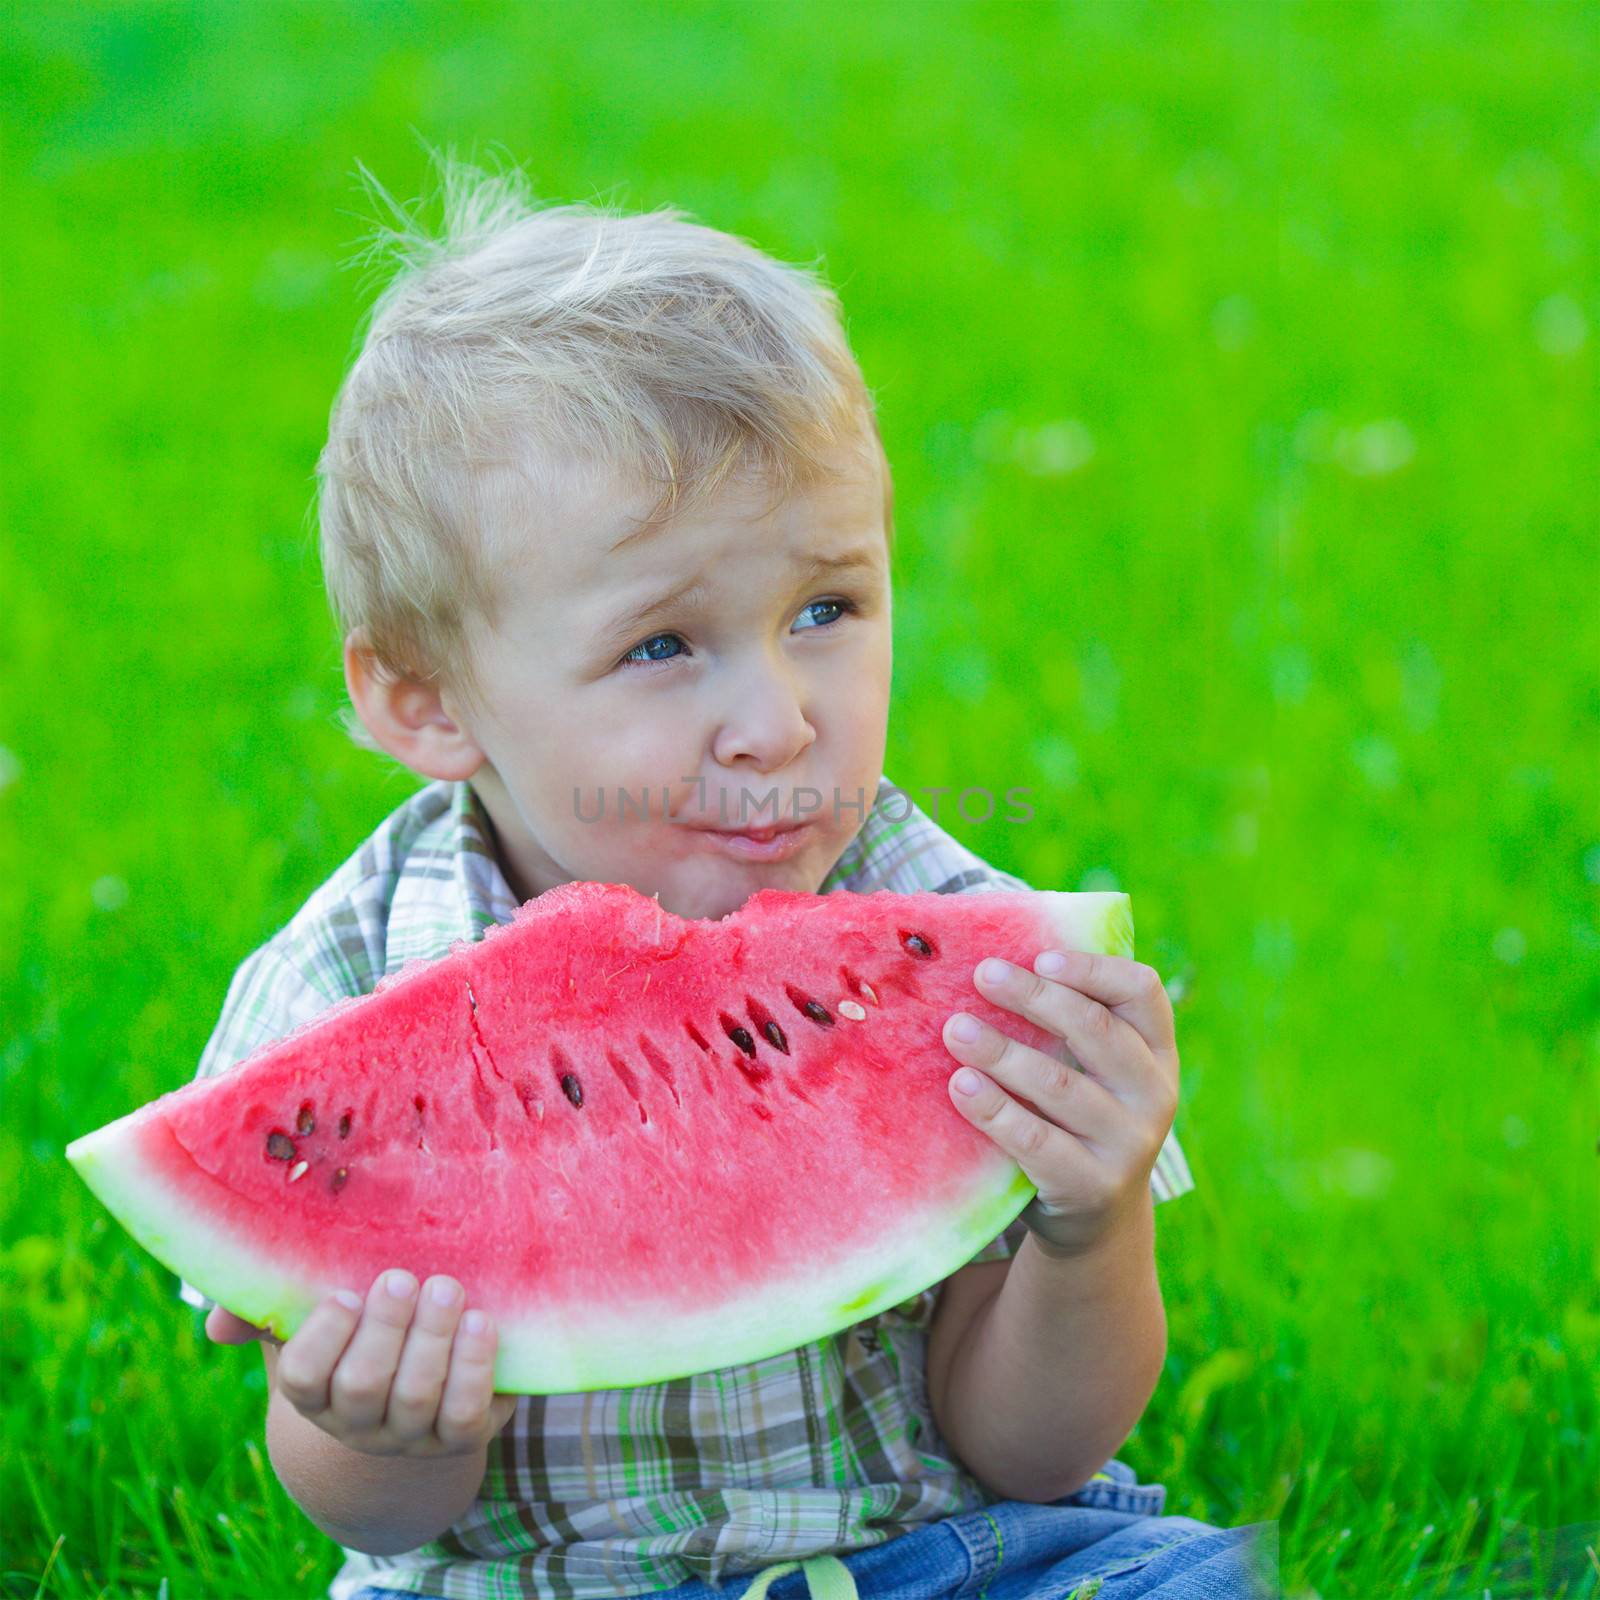 Kid with slice of watermelon, outdoors eating, picnic